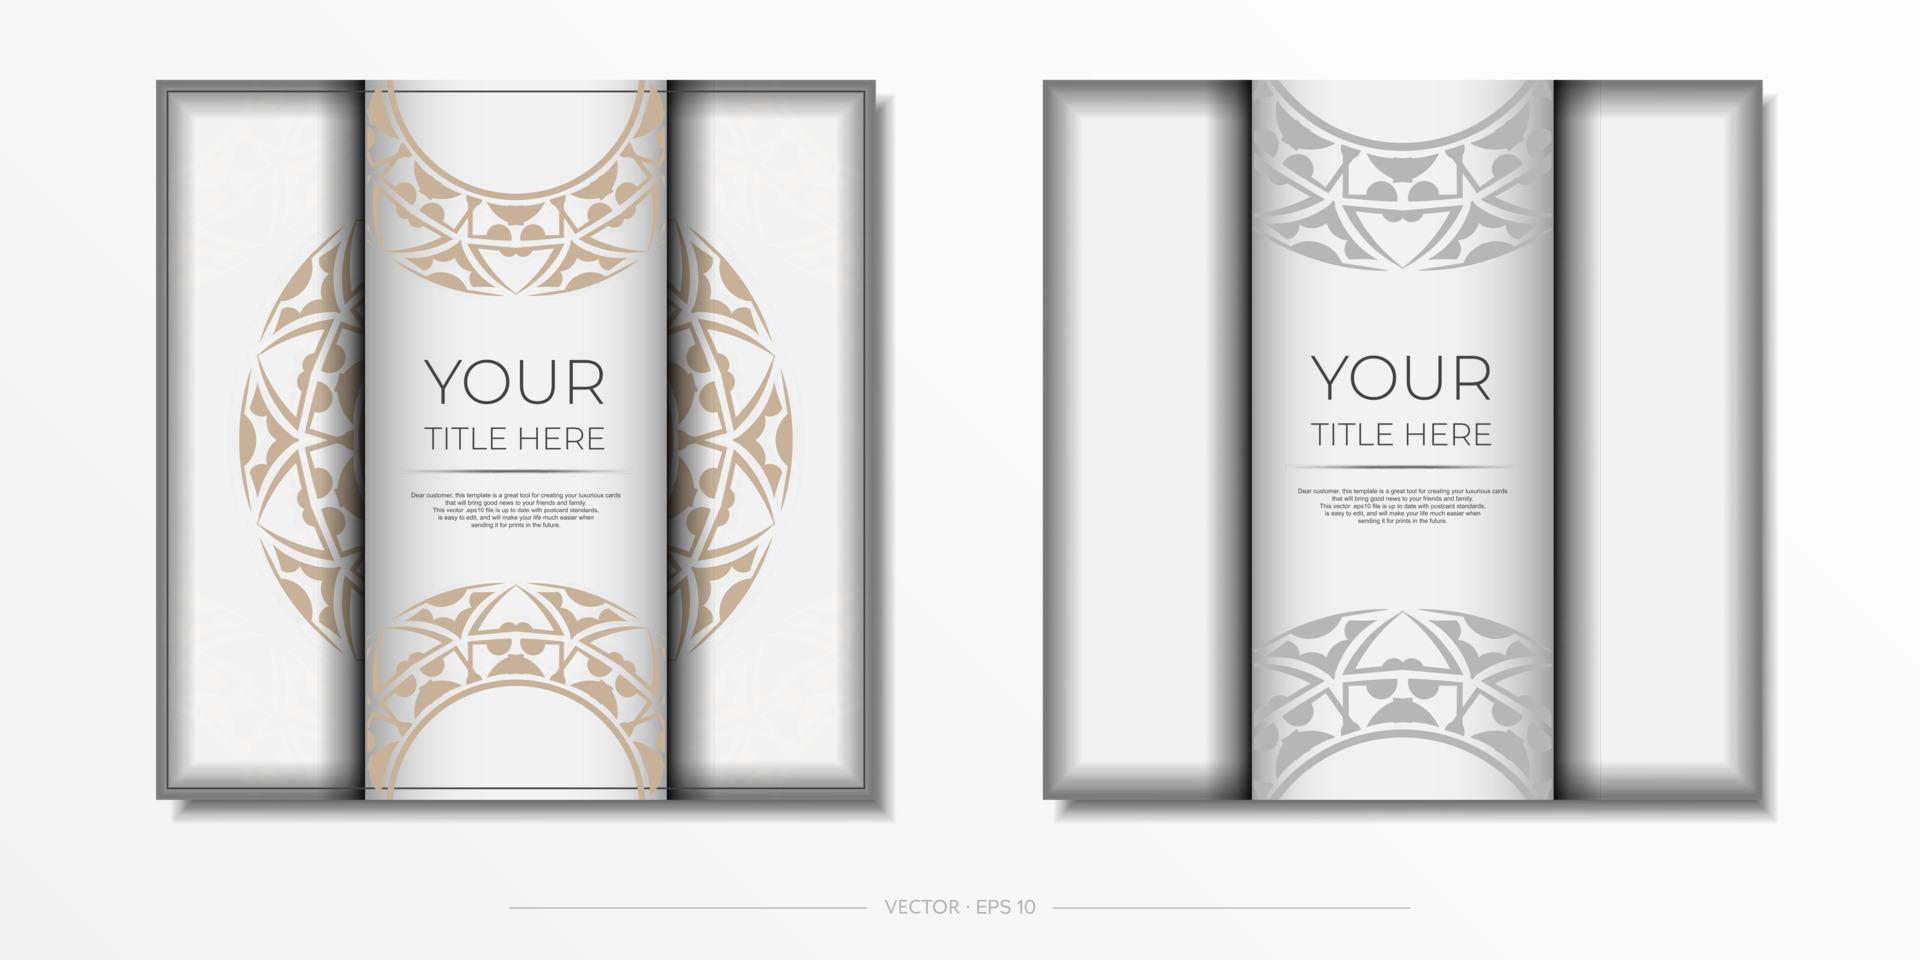 Vector Preparing invitation card with place for your text and abstract patterns. Luxurious Template for print design postcards White colors with patterns.